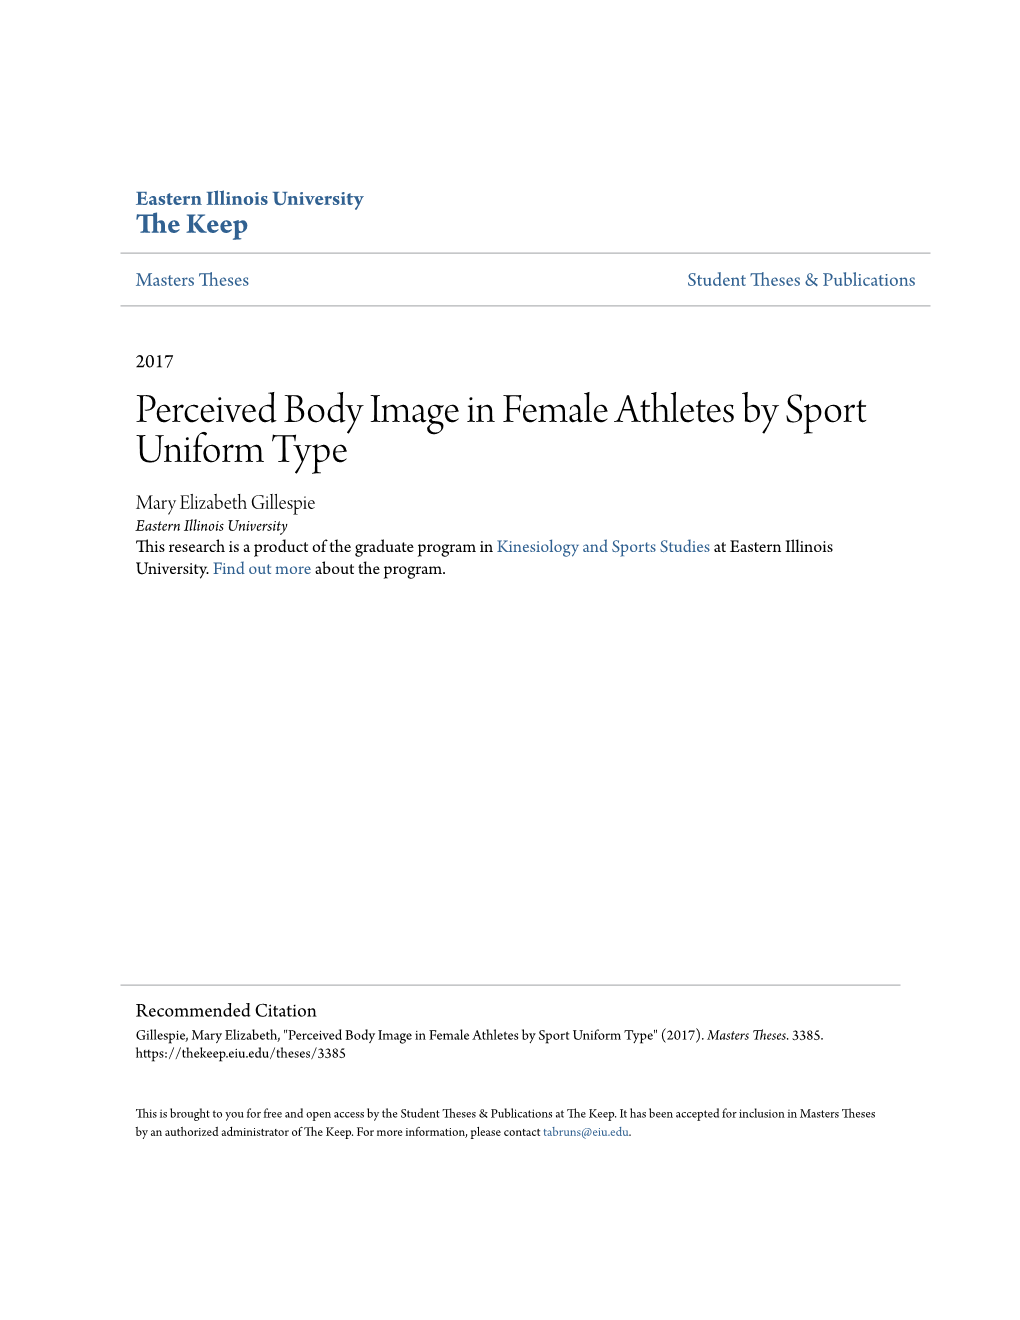 Perceived Body Image in Female Athletes by Sport Uniform Type